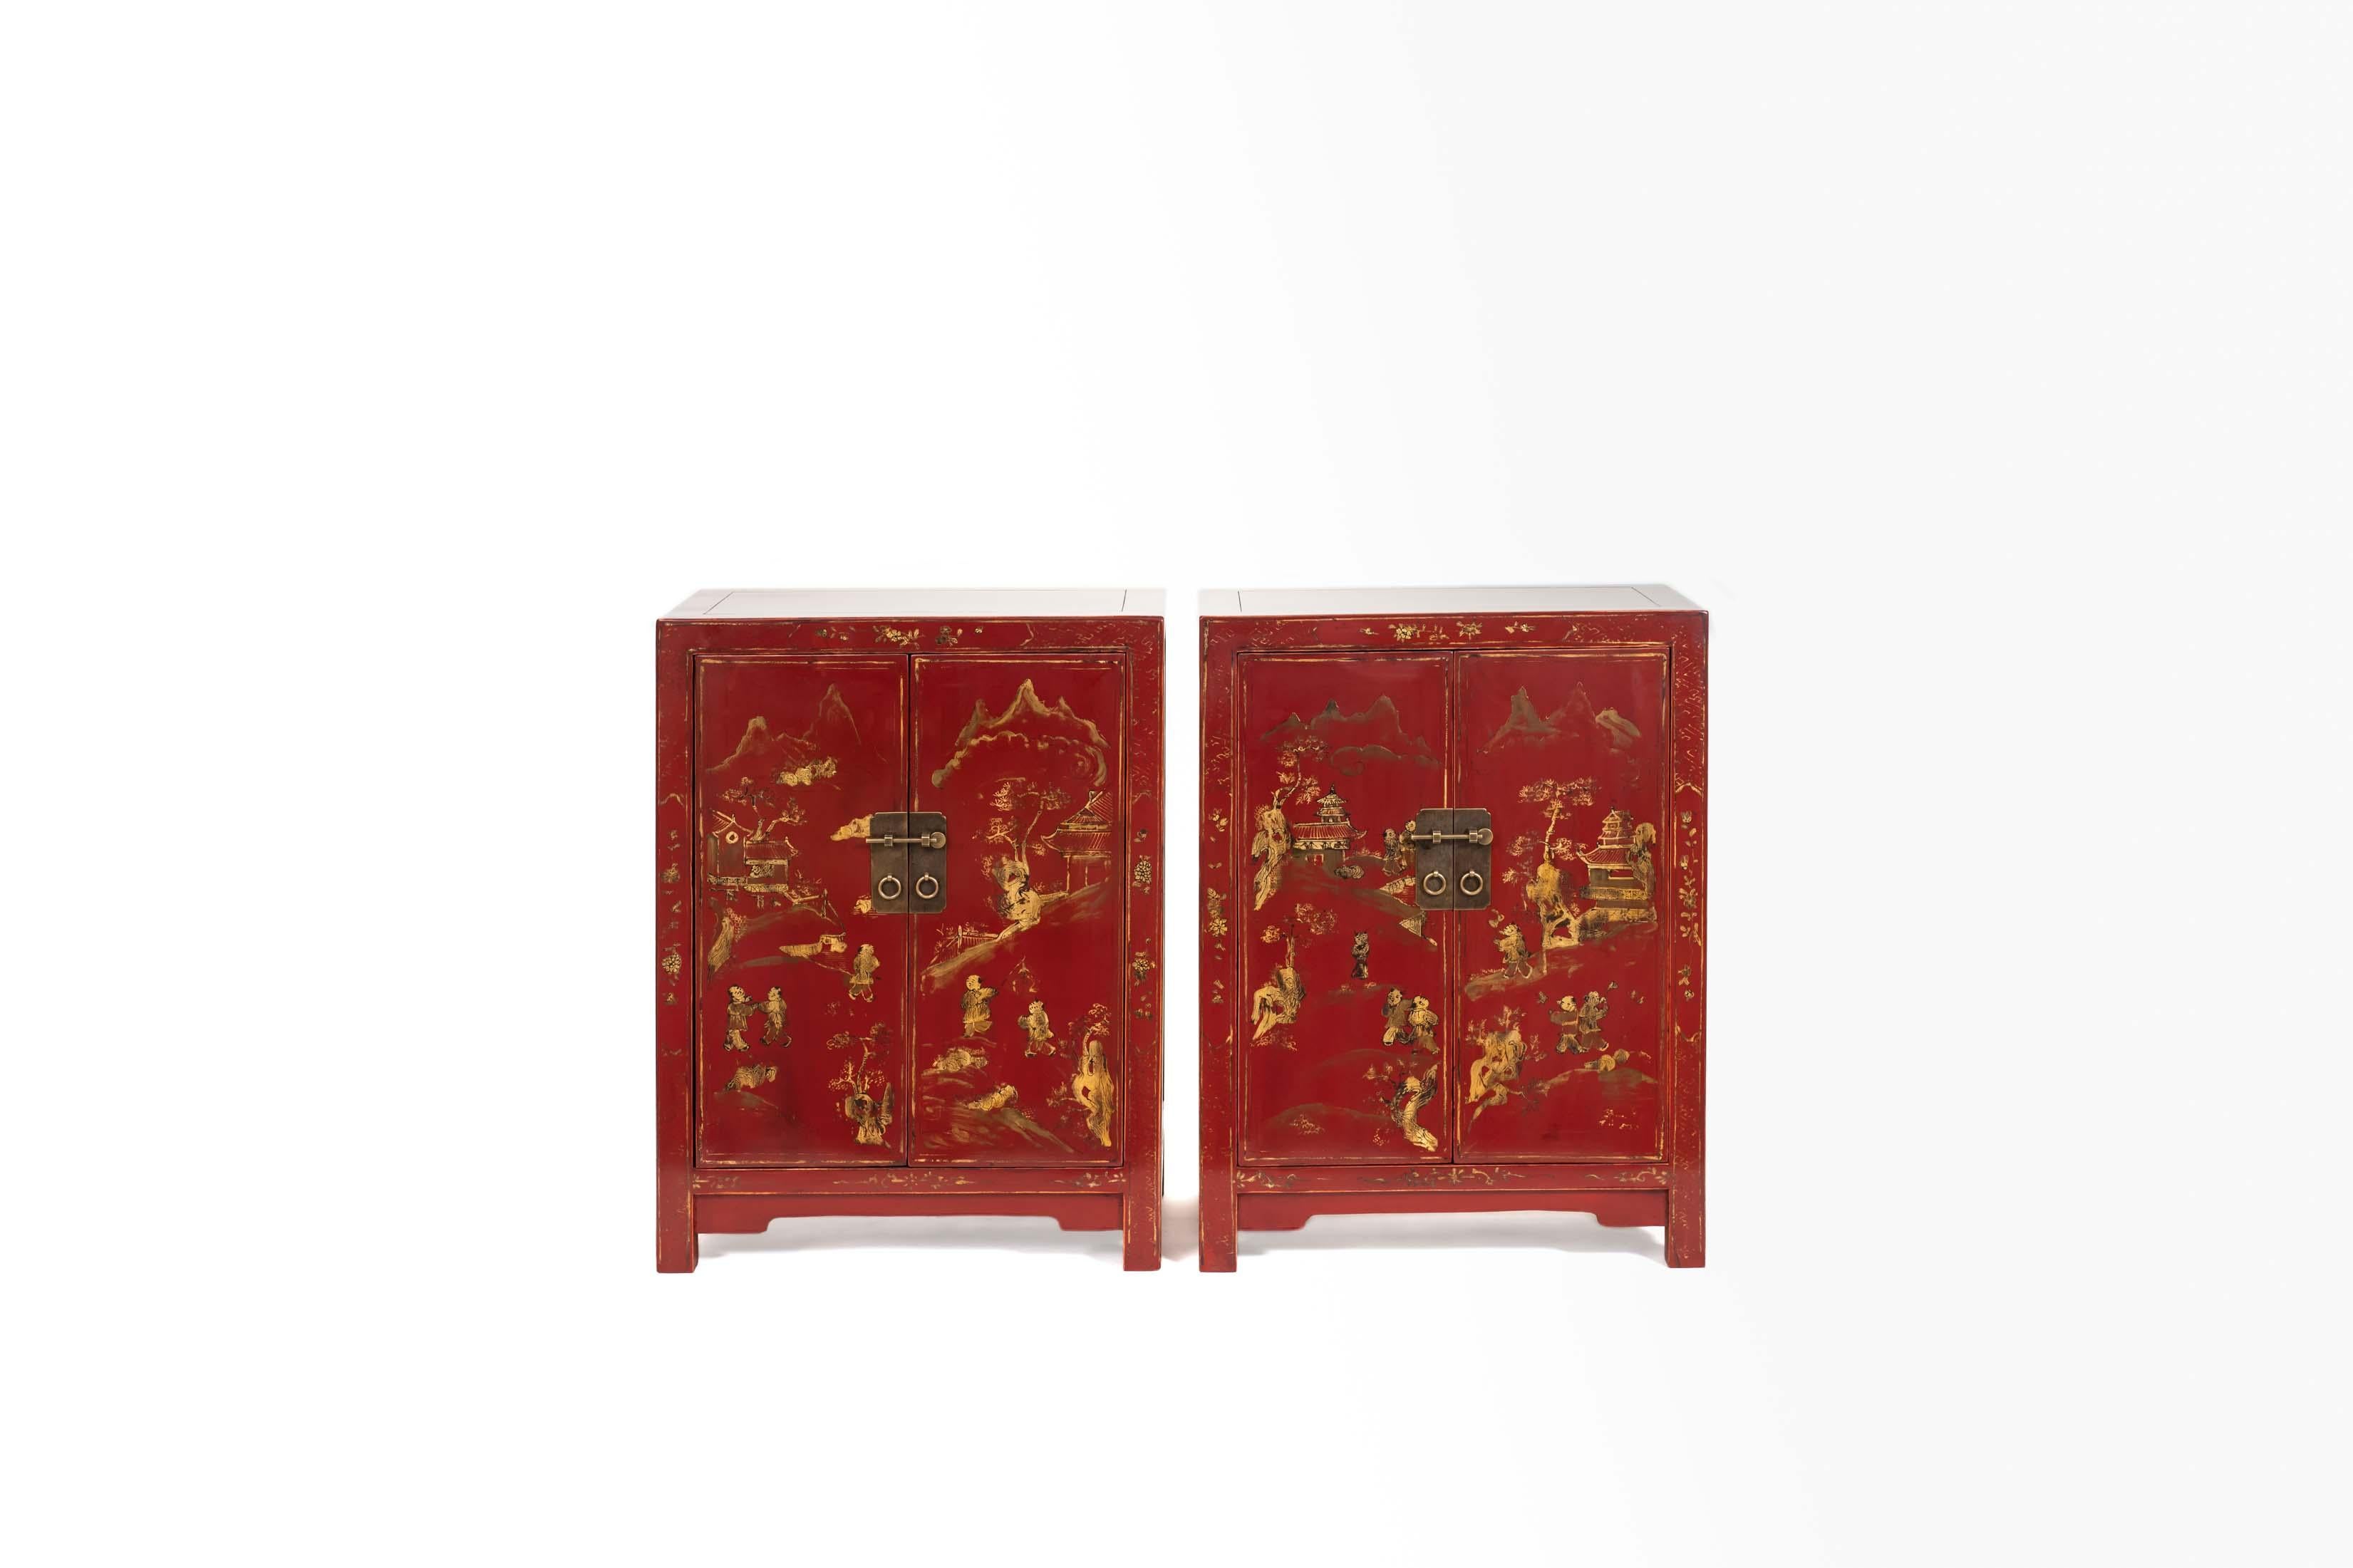 The square corner cabinets with rectangular-sectioned frames, a pair of flushed paneled doors with gilt hand-painting of children at play in the courtyard, opening to the interior with A mid-shelf, the legs continuing to form the feet, braced by